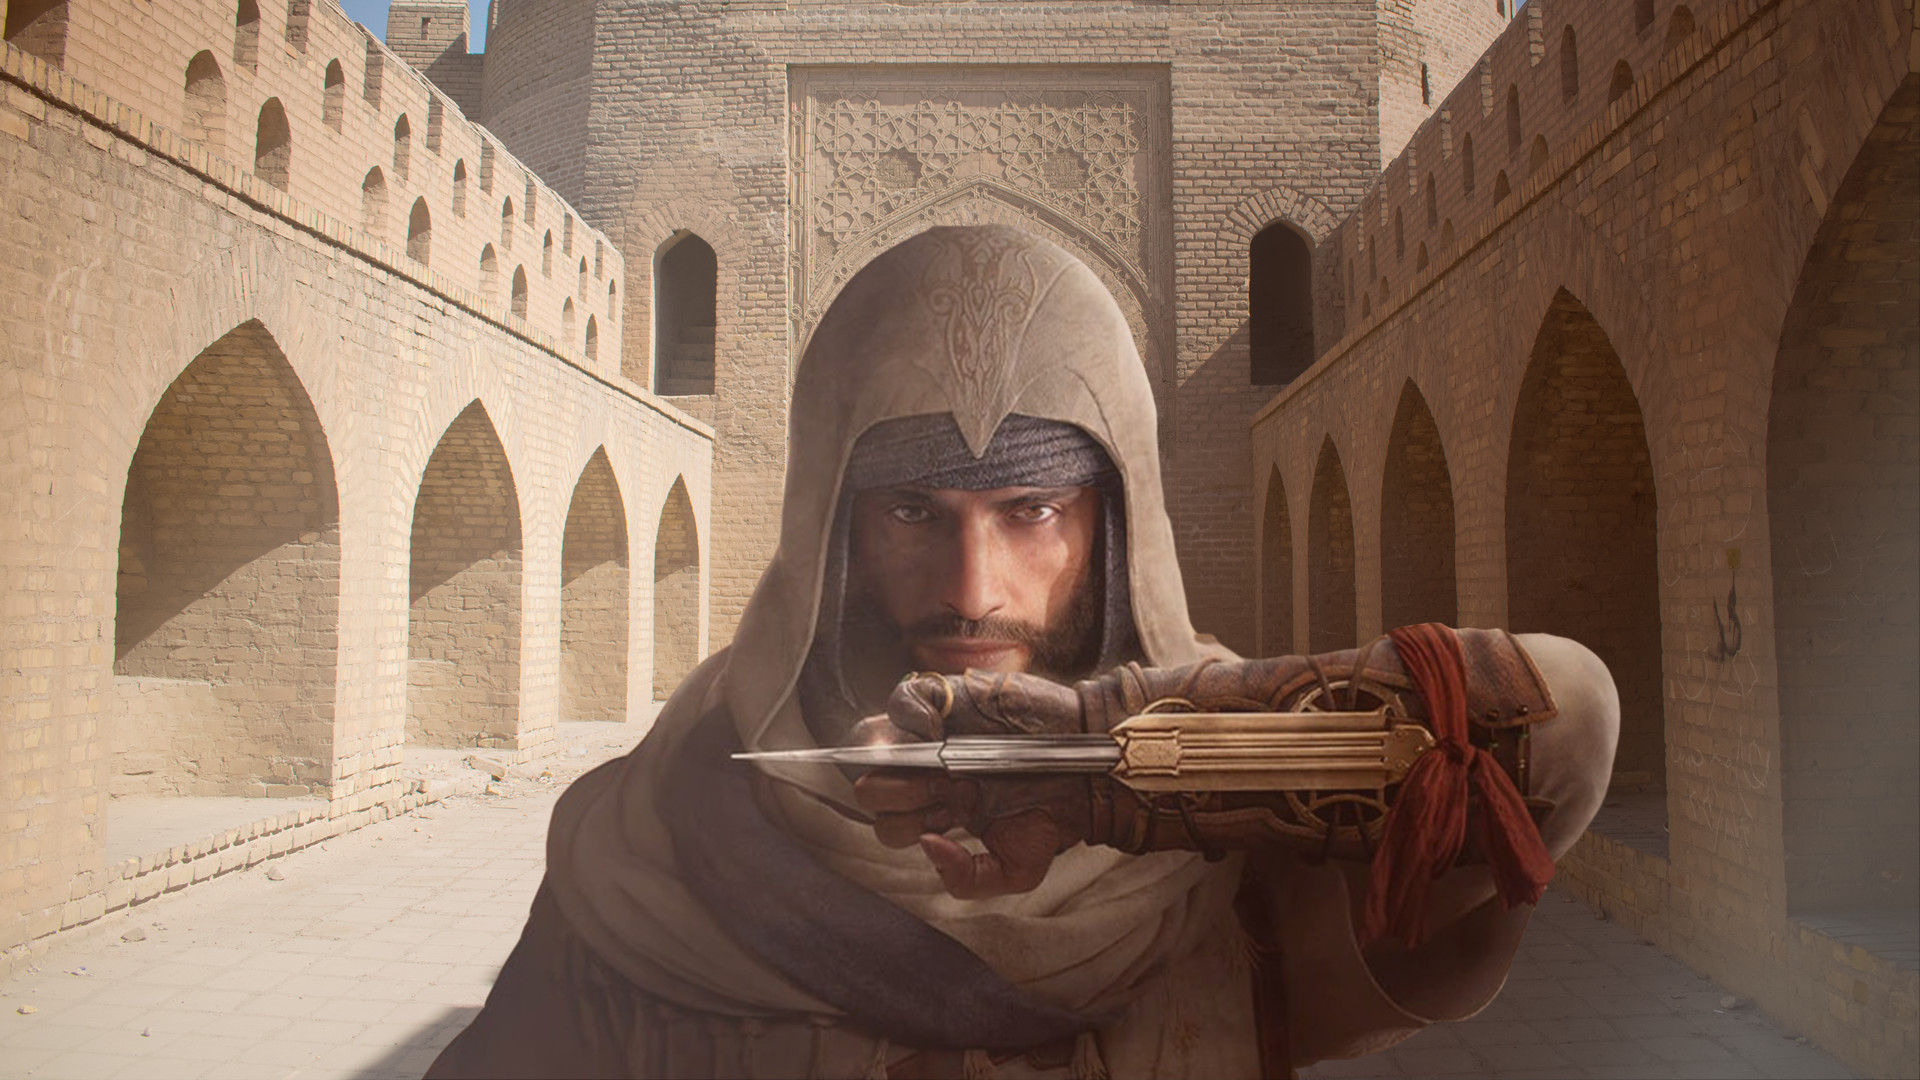 How long is Assassin's Creed?